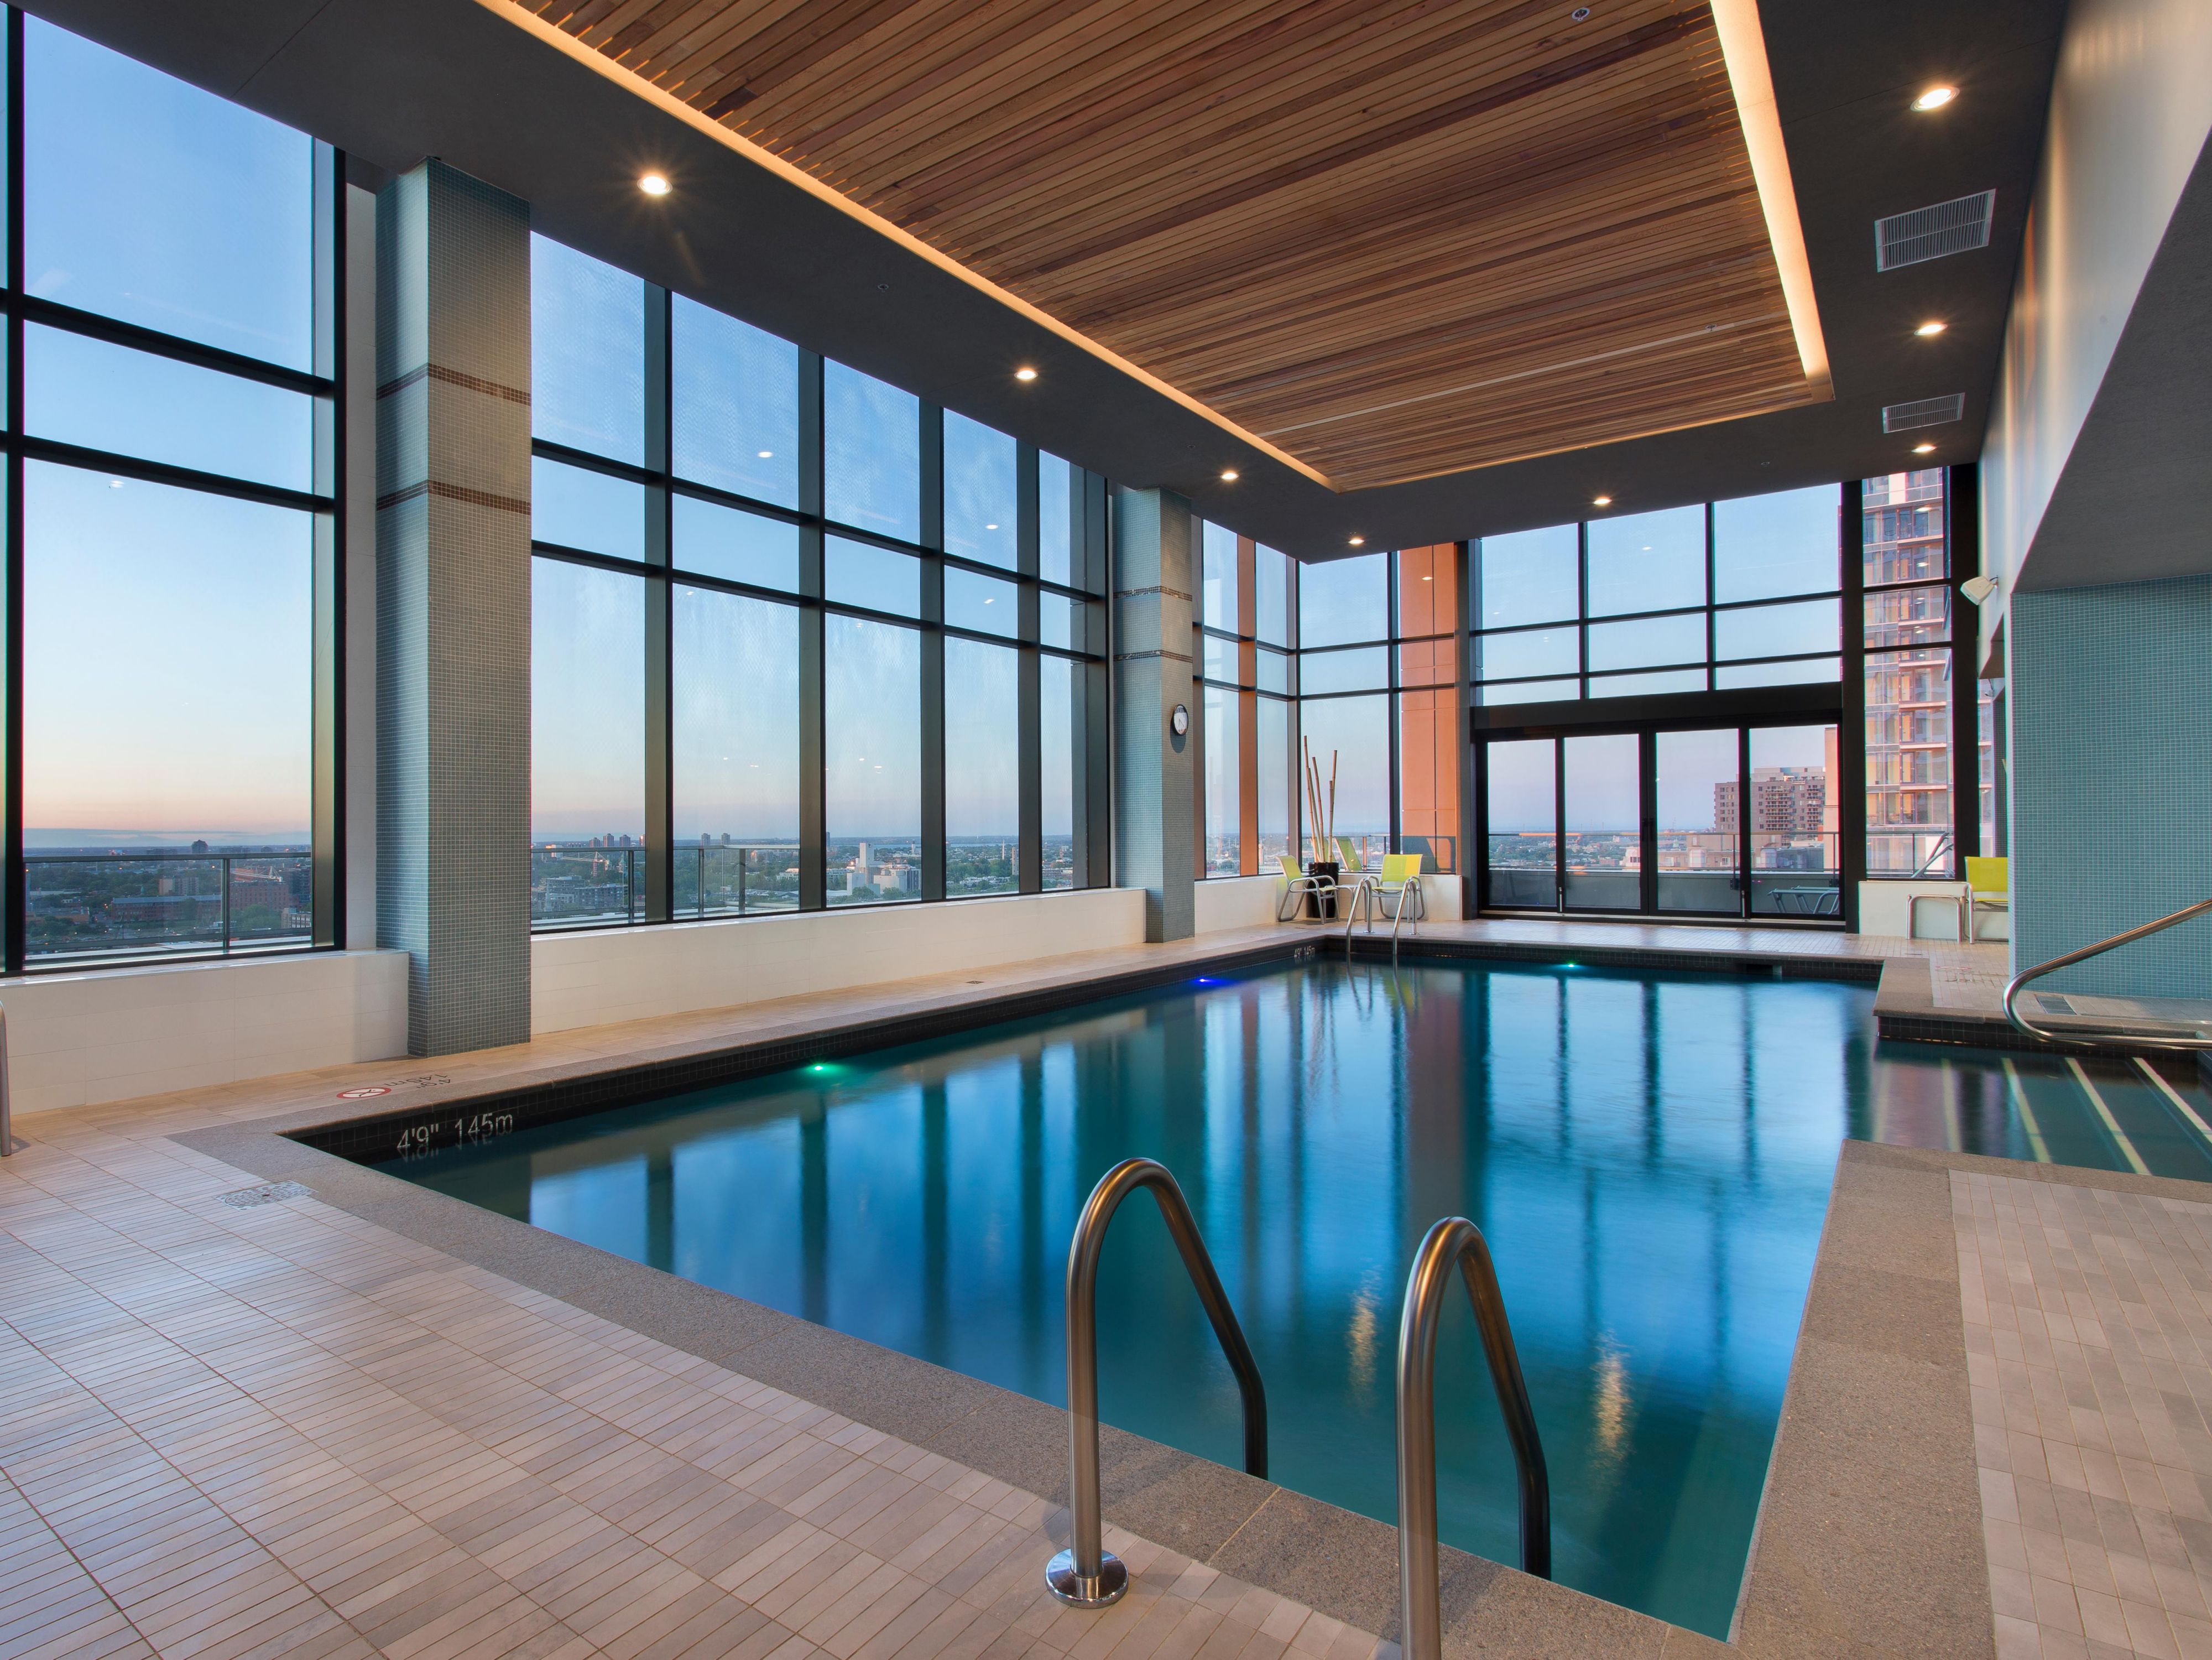 Heated Salted Pool on high floor with stunning view on the city of Montreal, Solarium, Jacuzzi, Sauna and fitness center free to access for all hotel guests